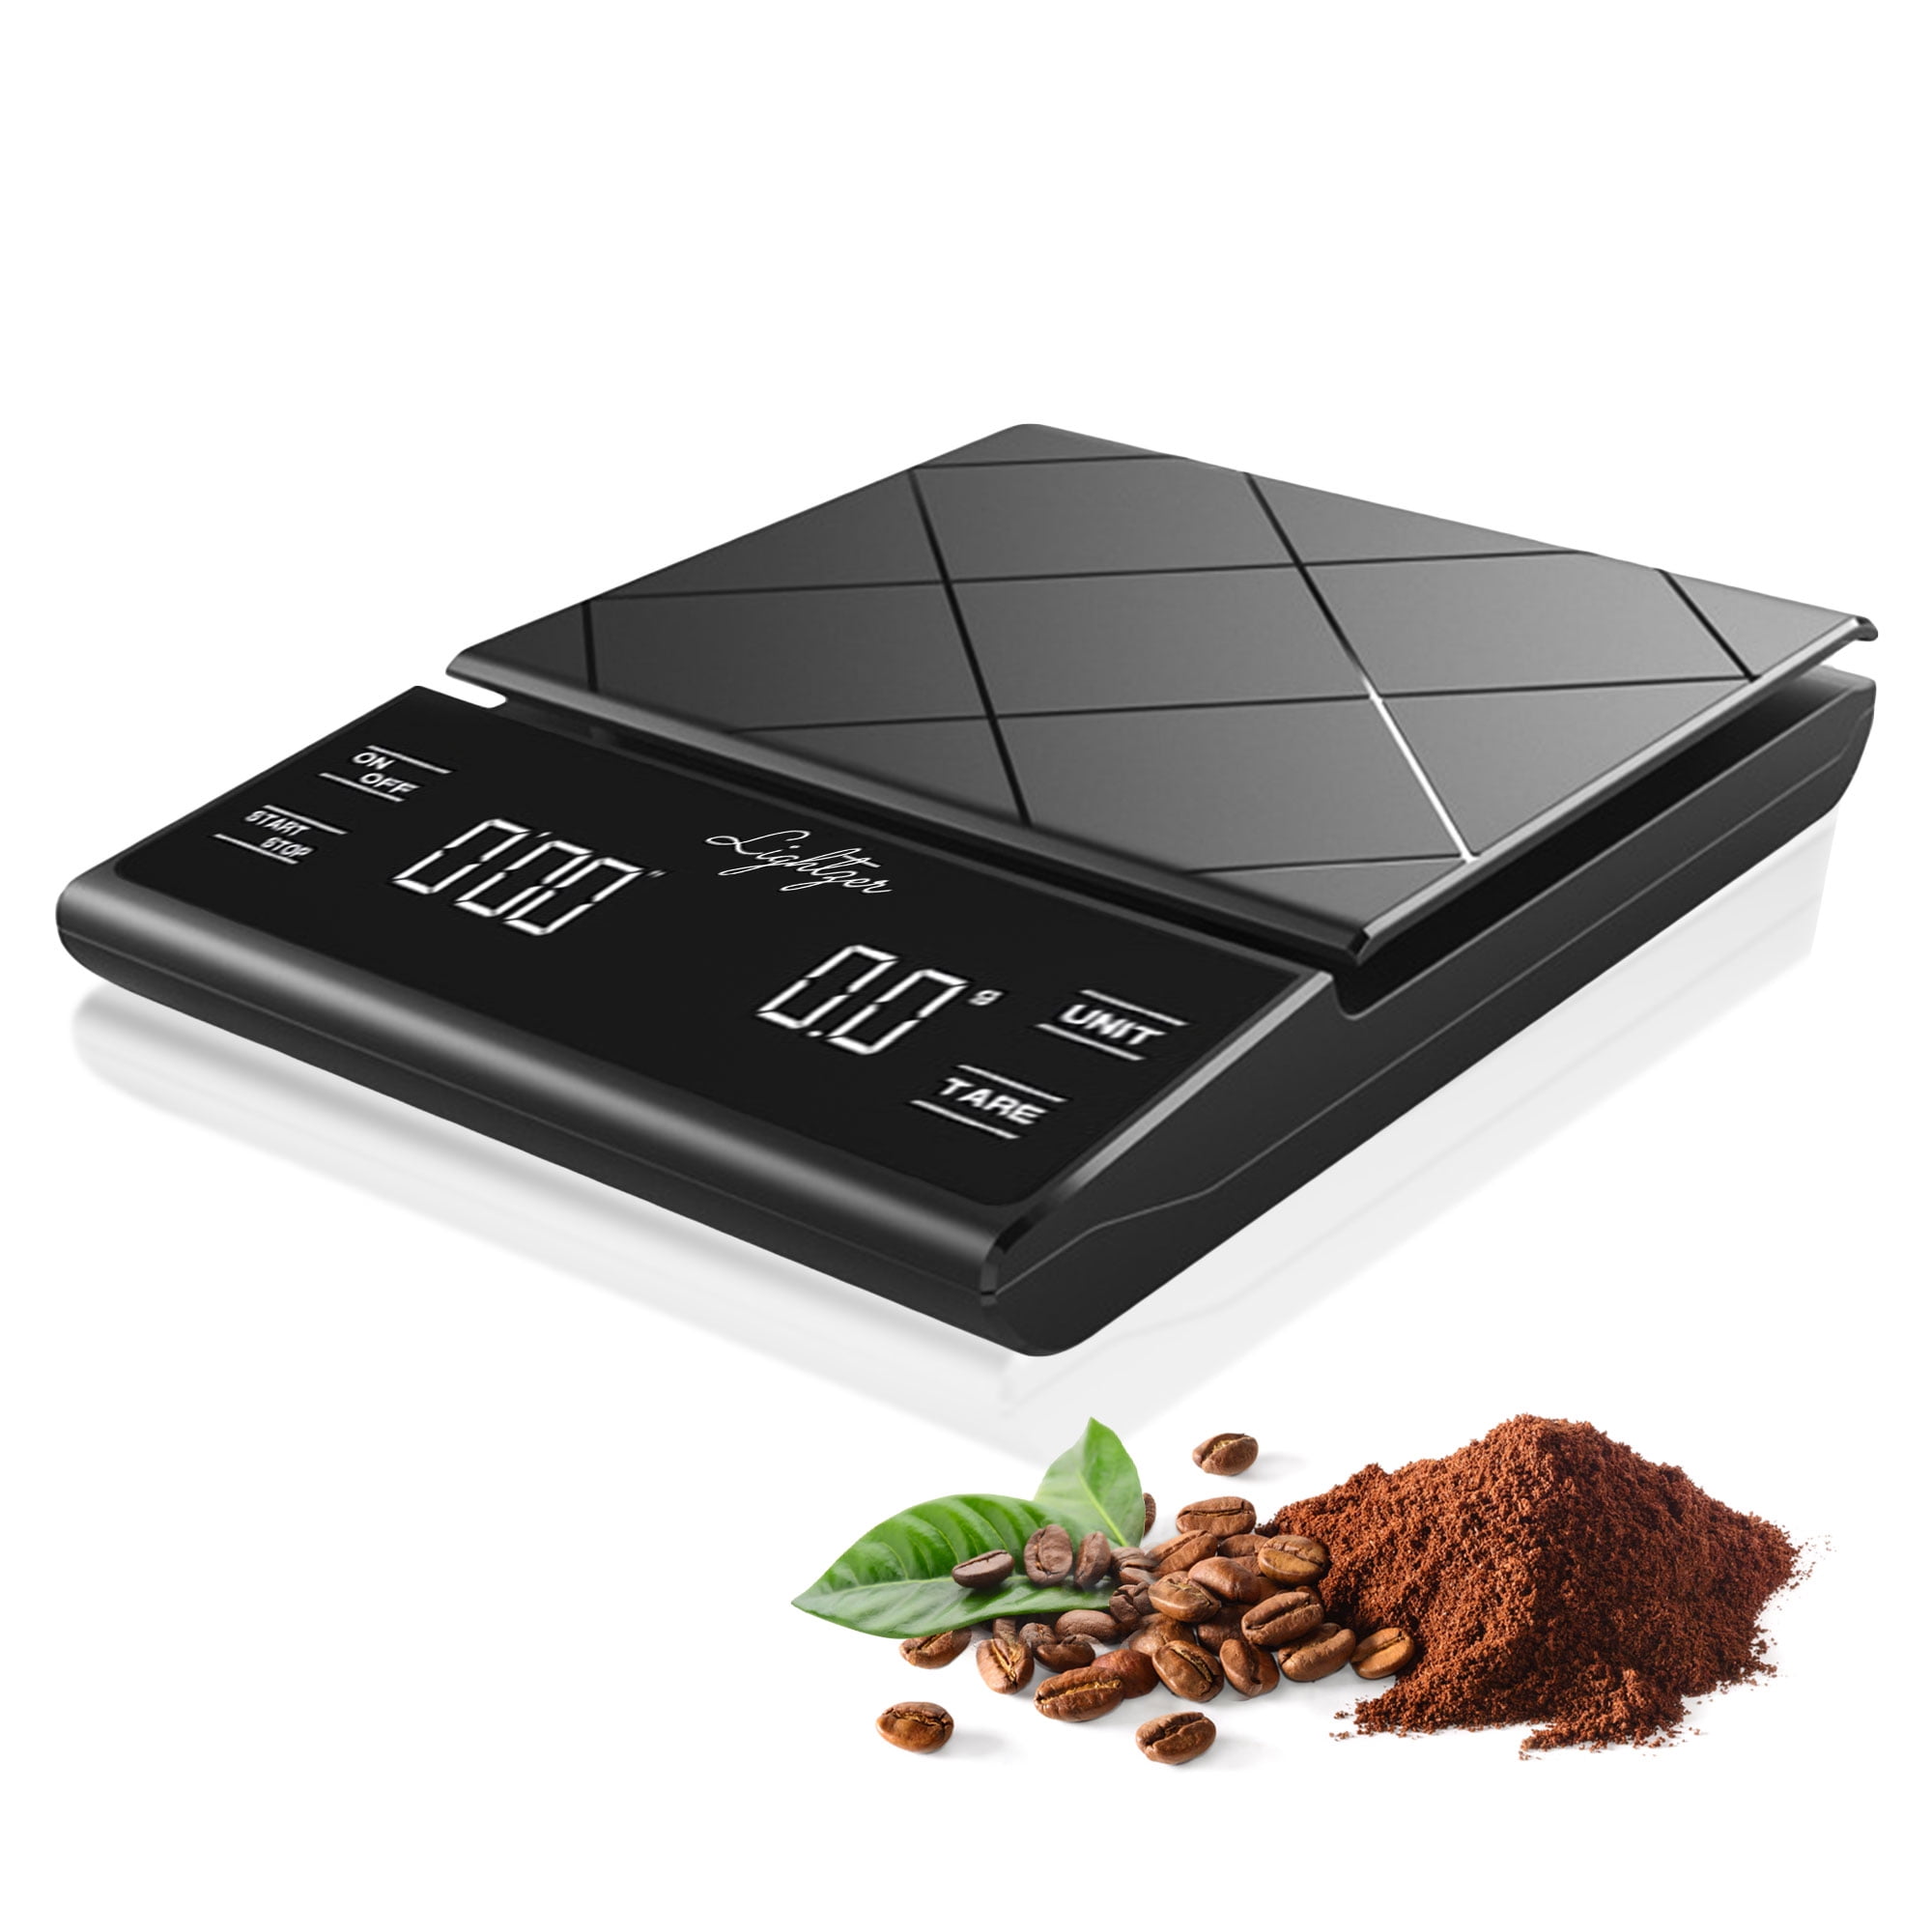 Electronic 3kg LCD Digital Drip Coffee Scale with Timer – BaristaSpace  Espresso Coffee Tool including milk jug,tamper and distributor for sale.